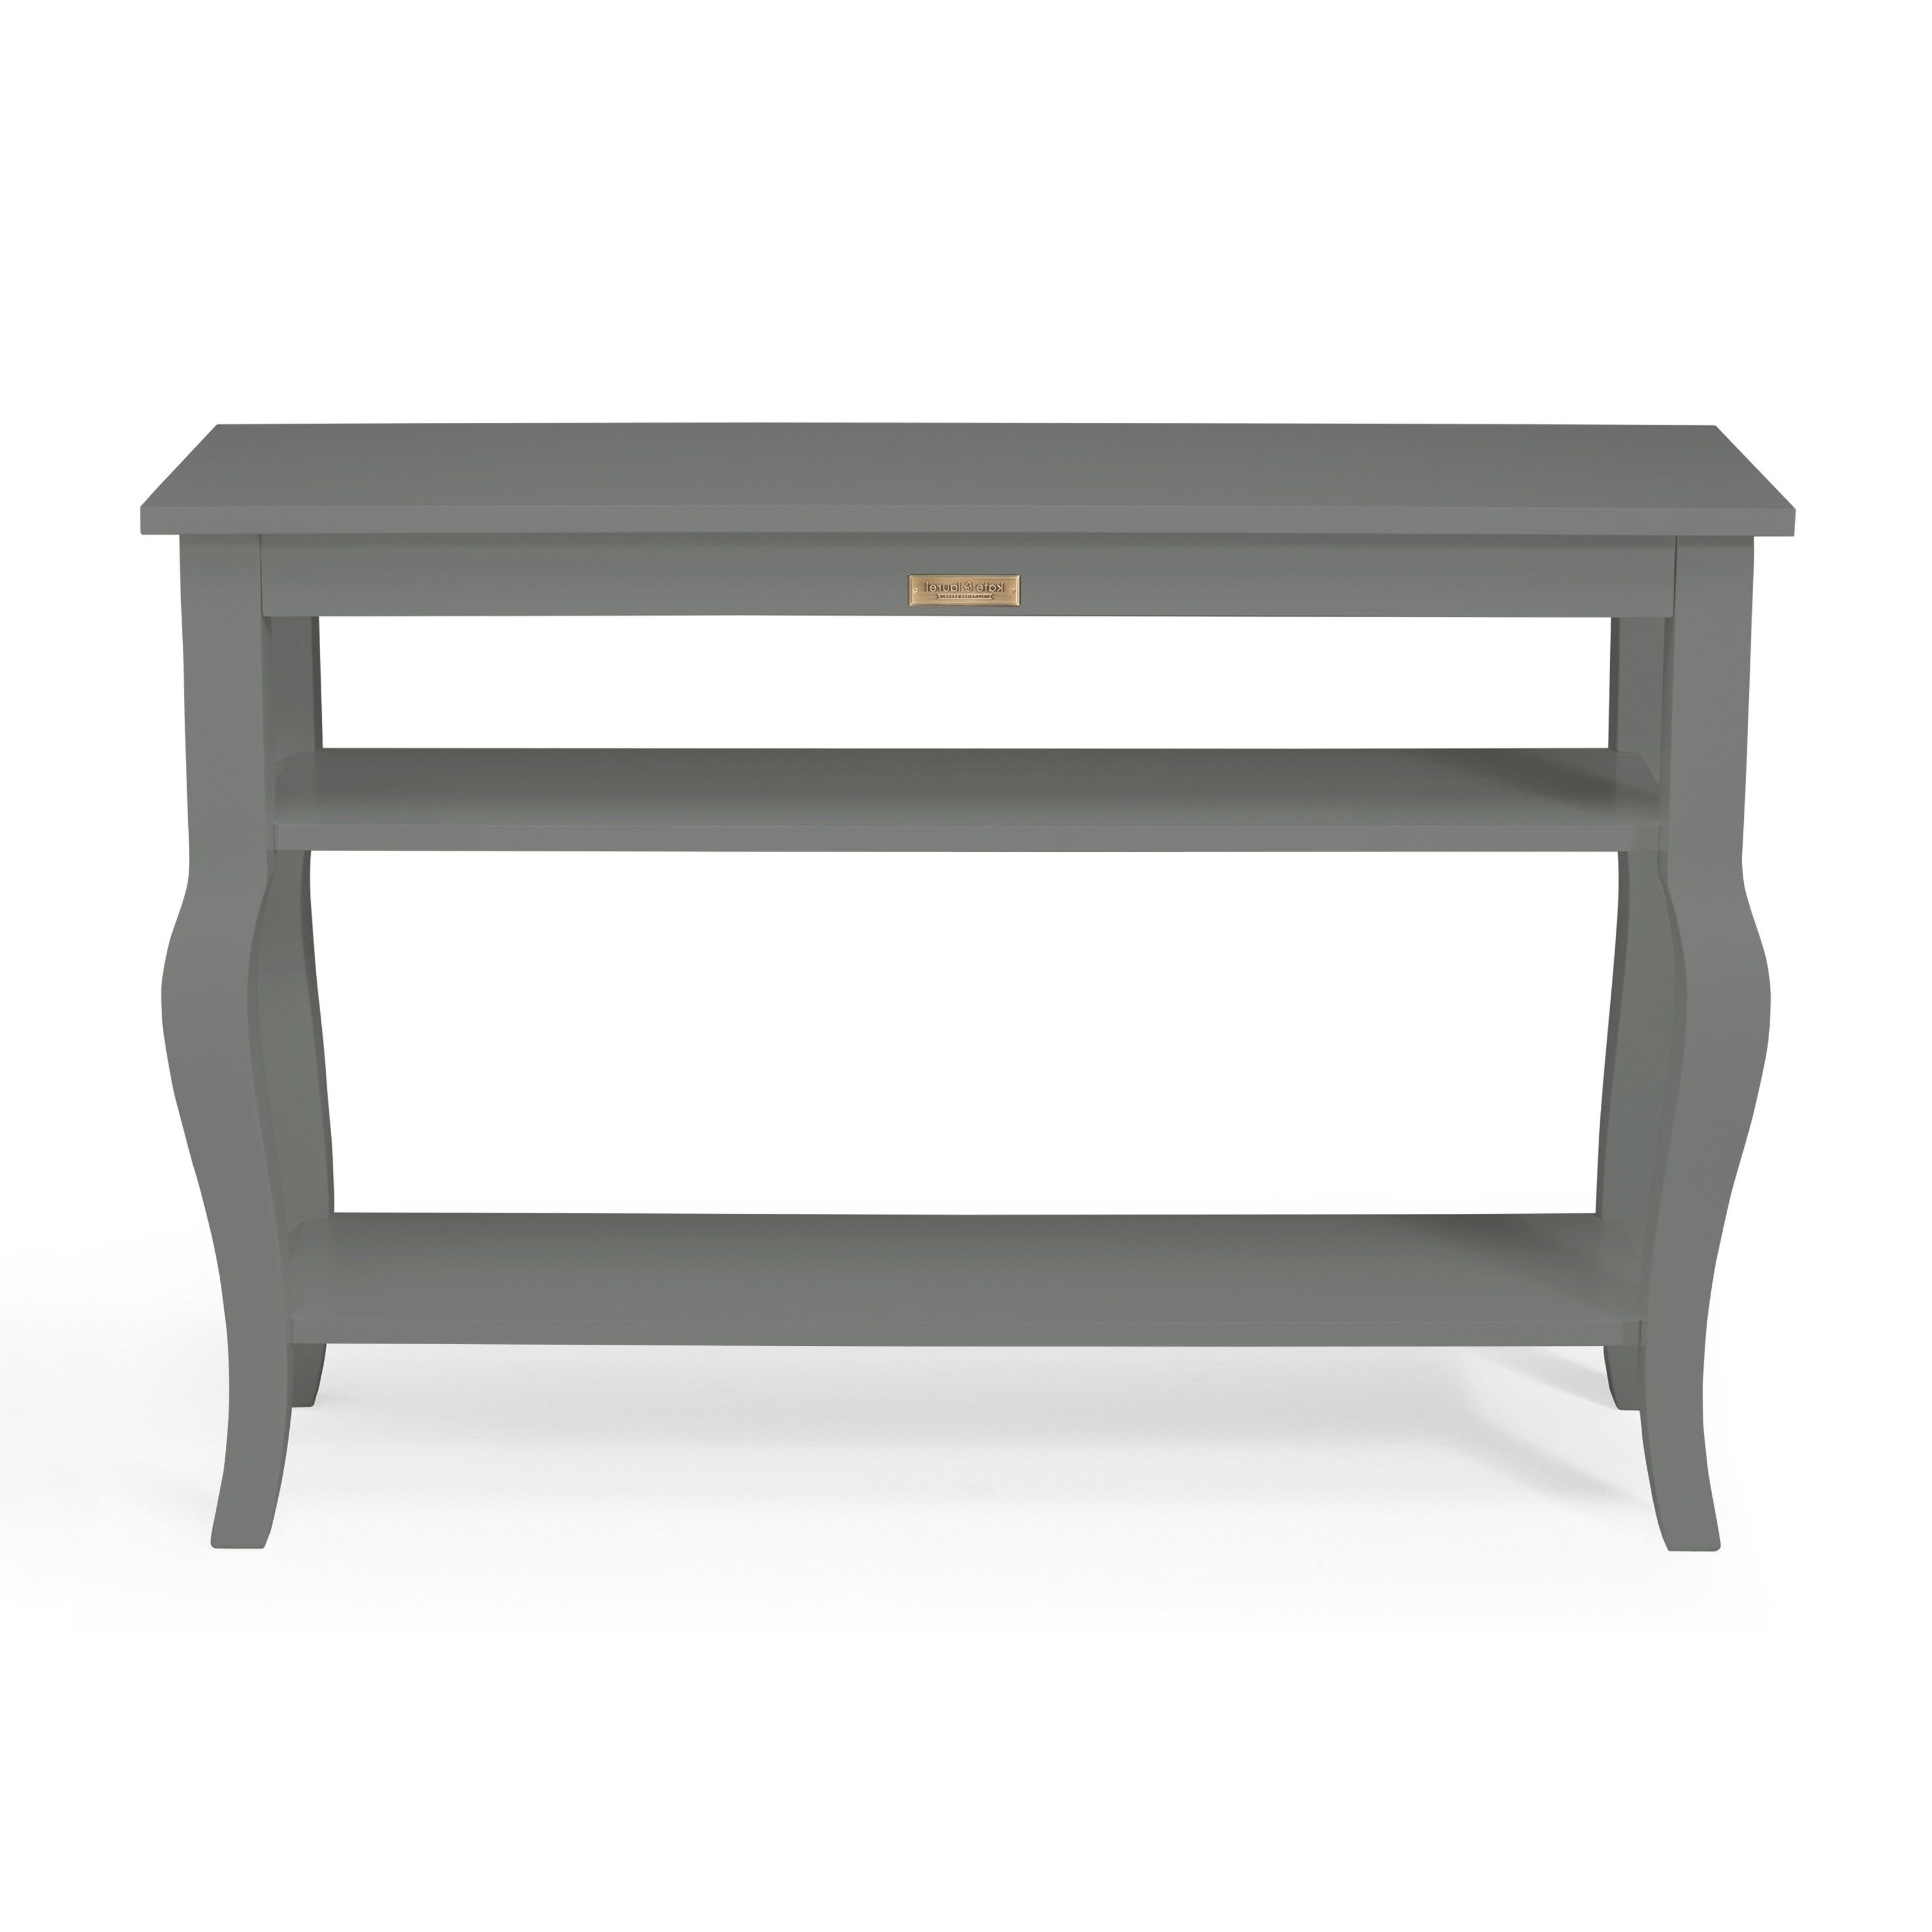 Kate And Laurel Lillian Wood 2 Shelf Console Table With Curved Legs Intended For 2 Shelf Buffets With Curved Legs (Gallery 1 of 20)